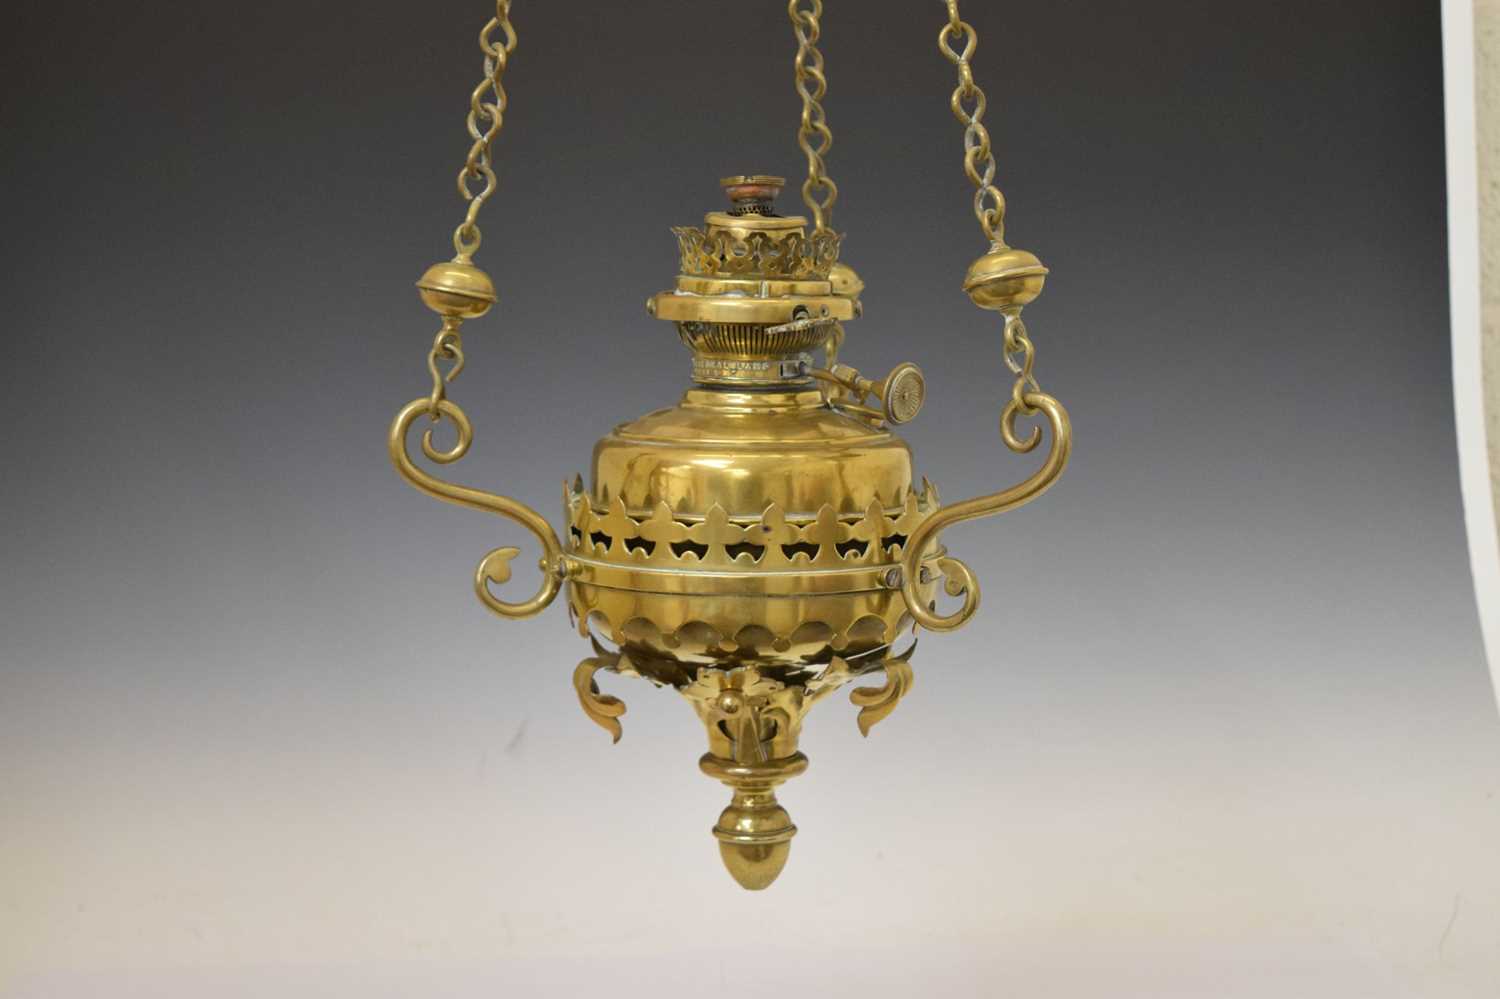 Early 20th century brass ecclesiastical light fitting - Image 6 of 13